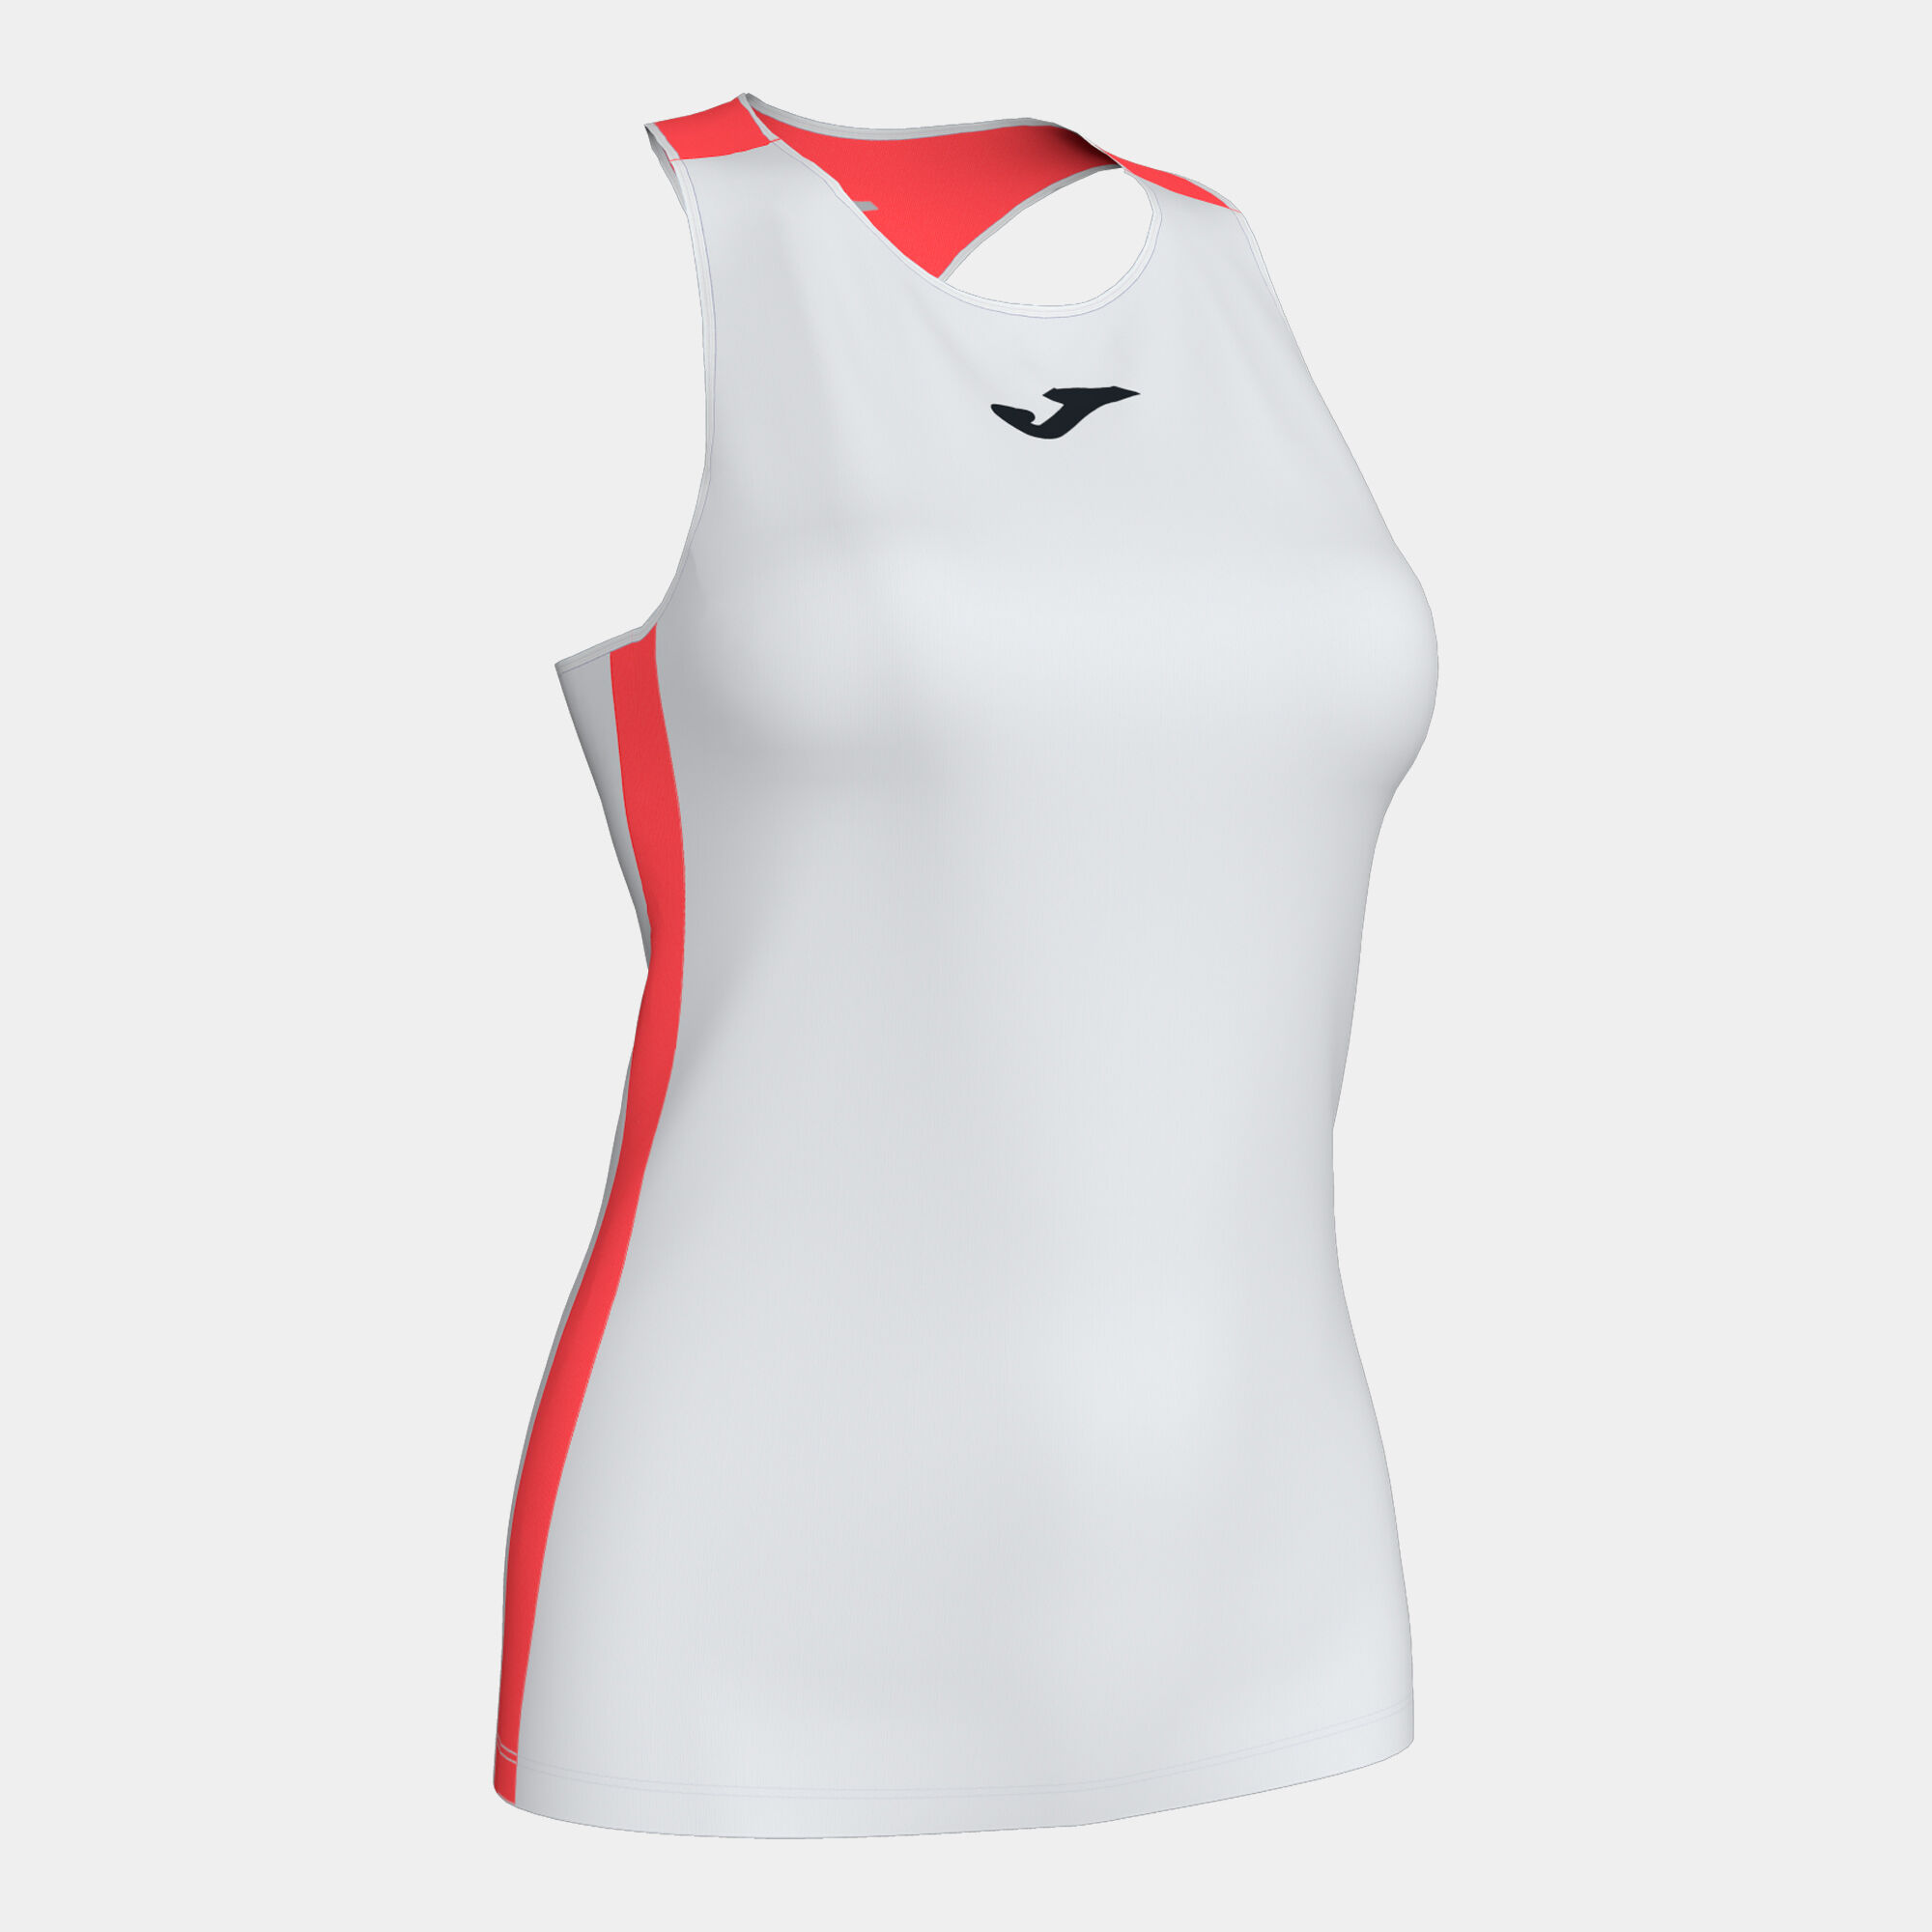 TANK TOP WOMAN TORNEO WHITE FLUORESCENT CORAL